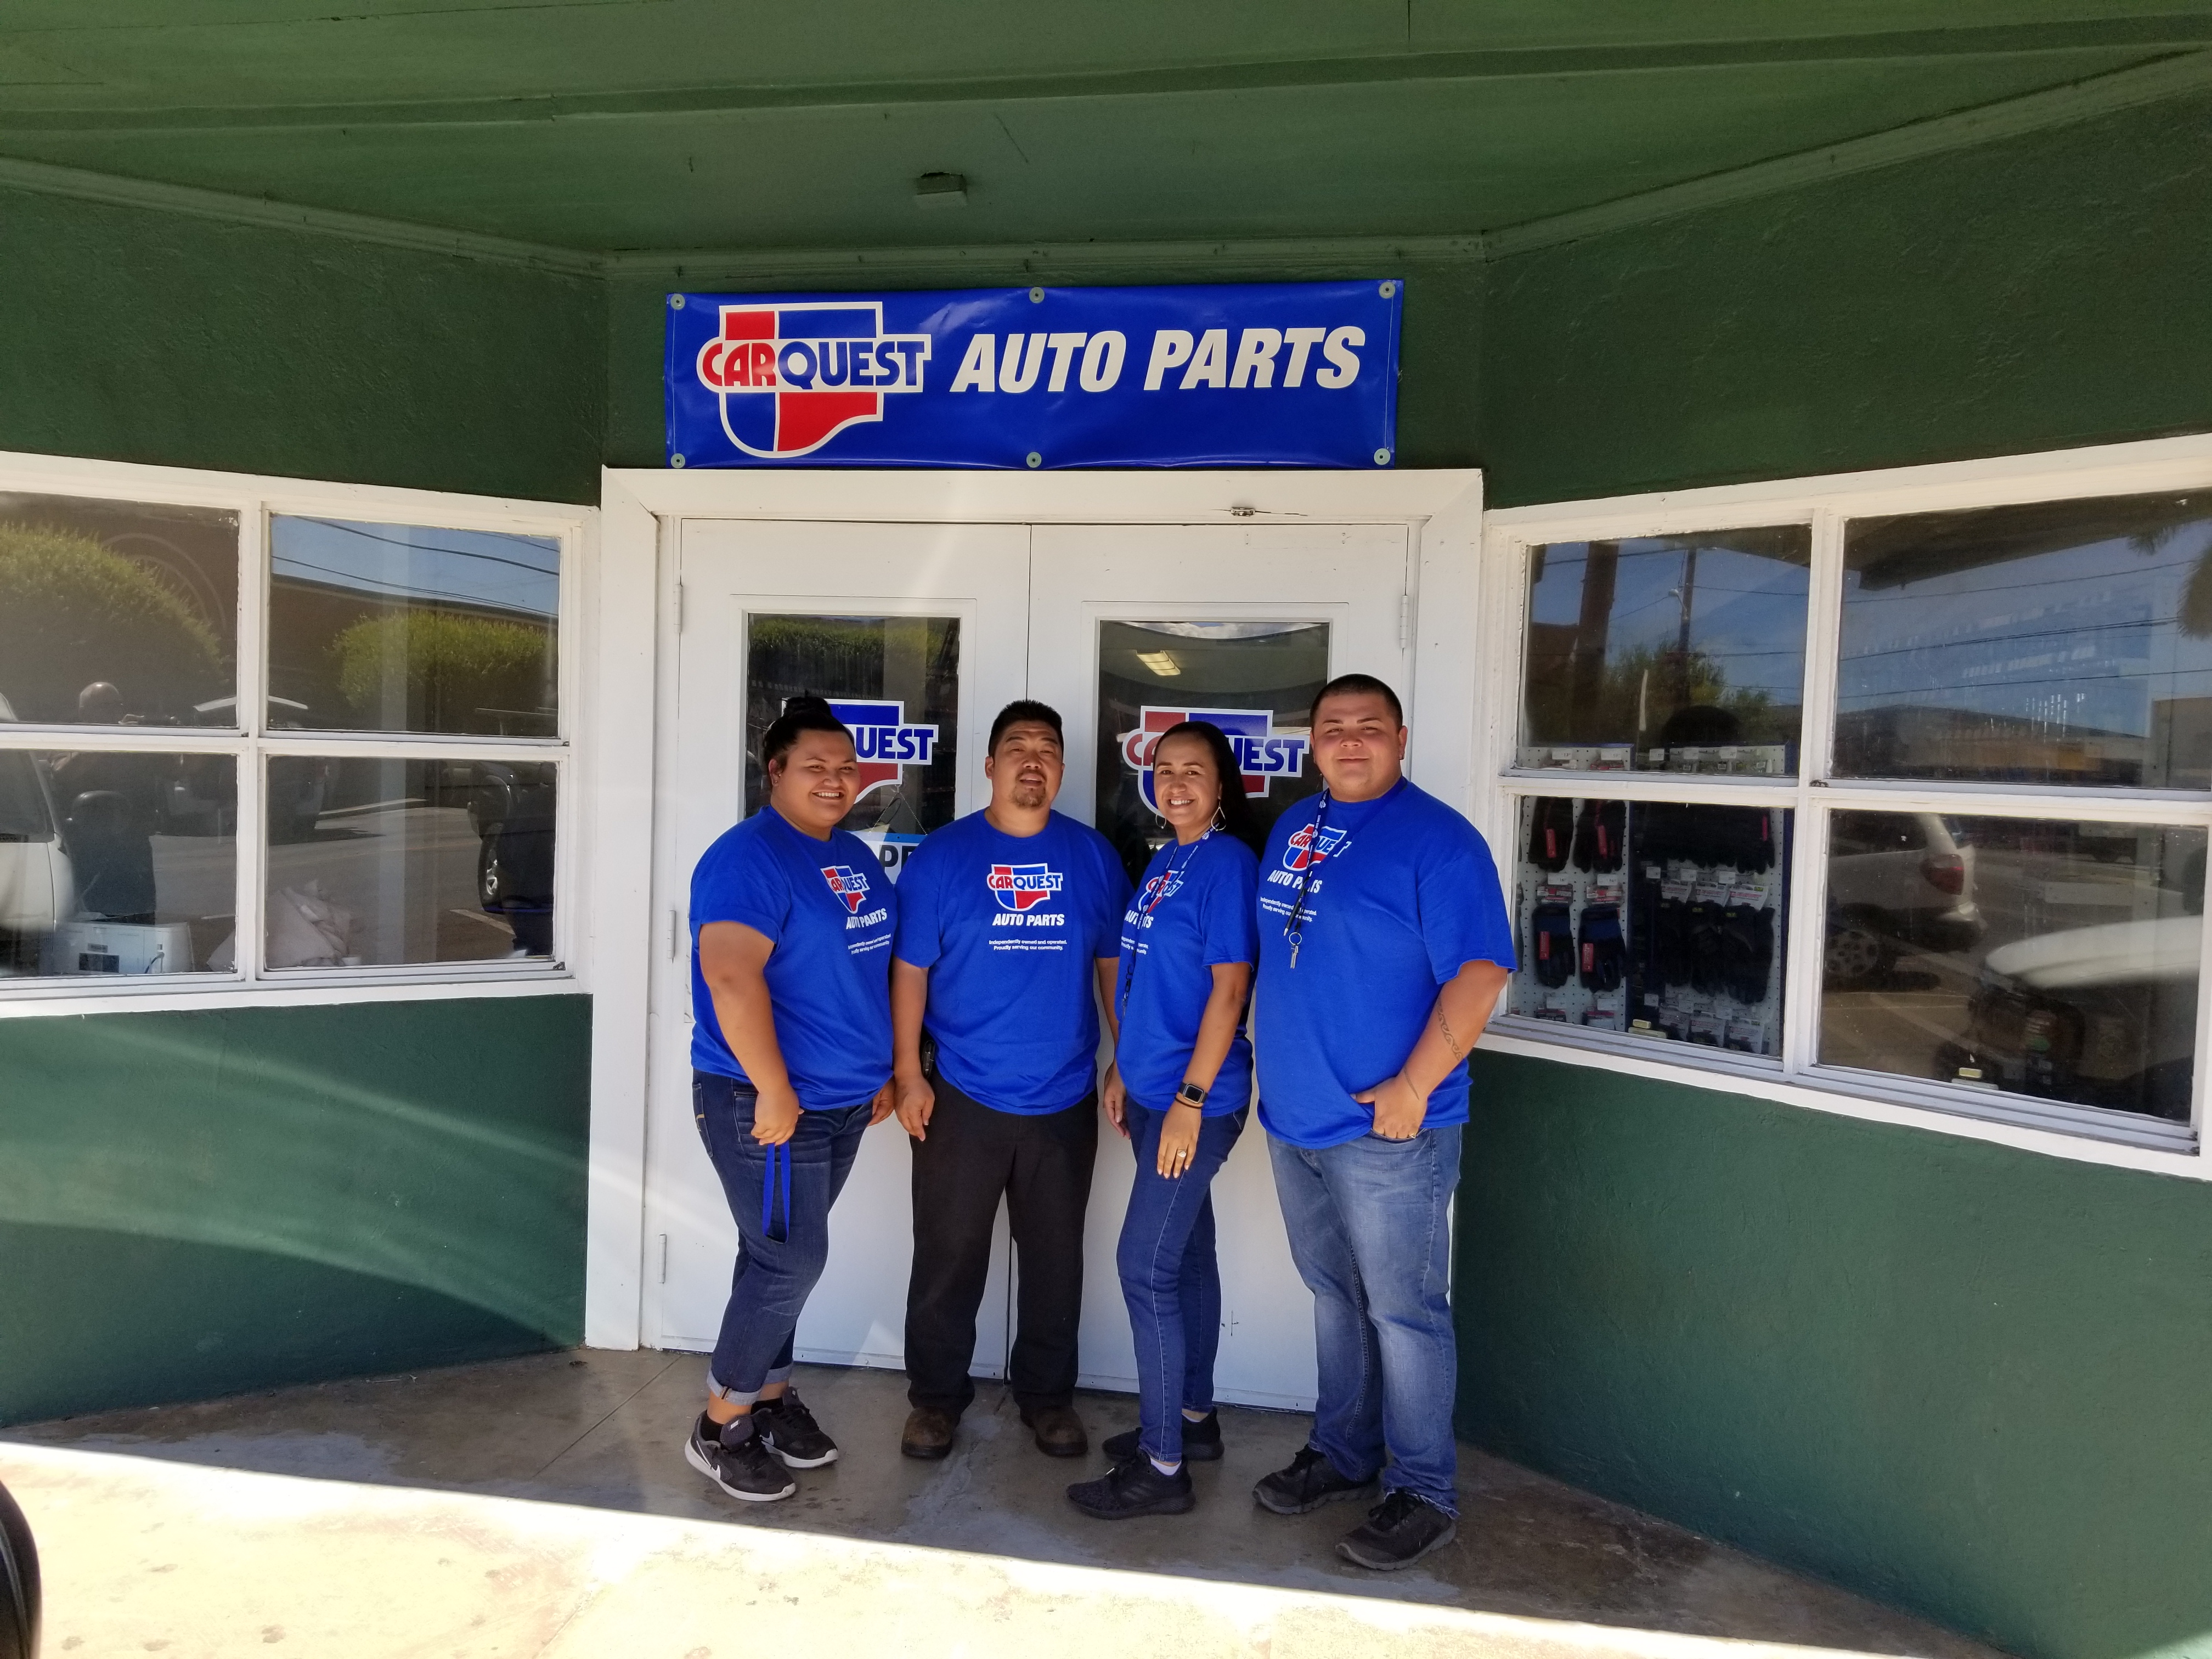 Reviews, photos, directions, hours, links and more for this and other waimea, hi auto parts . Carquest Auto Parts Molokai Auto Parts In Kaunakakai Hi Auto Parts Supplies By Yellow Pages Directory Inc